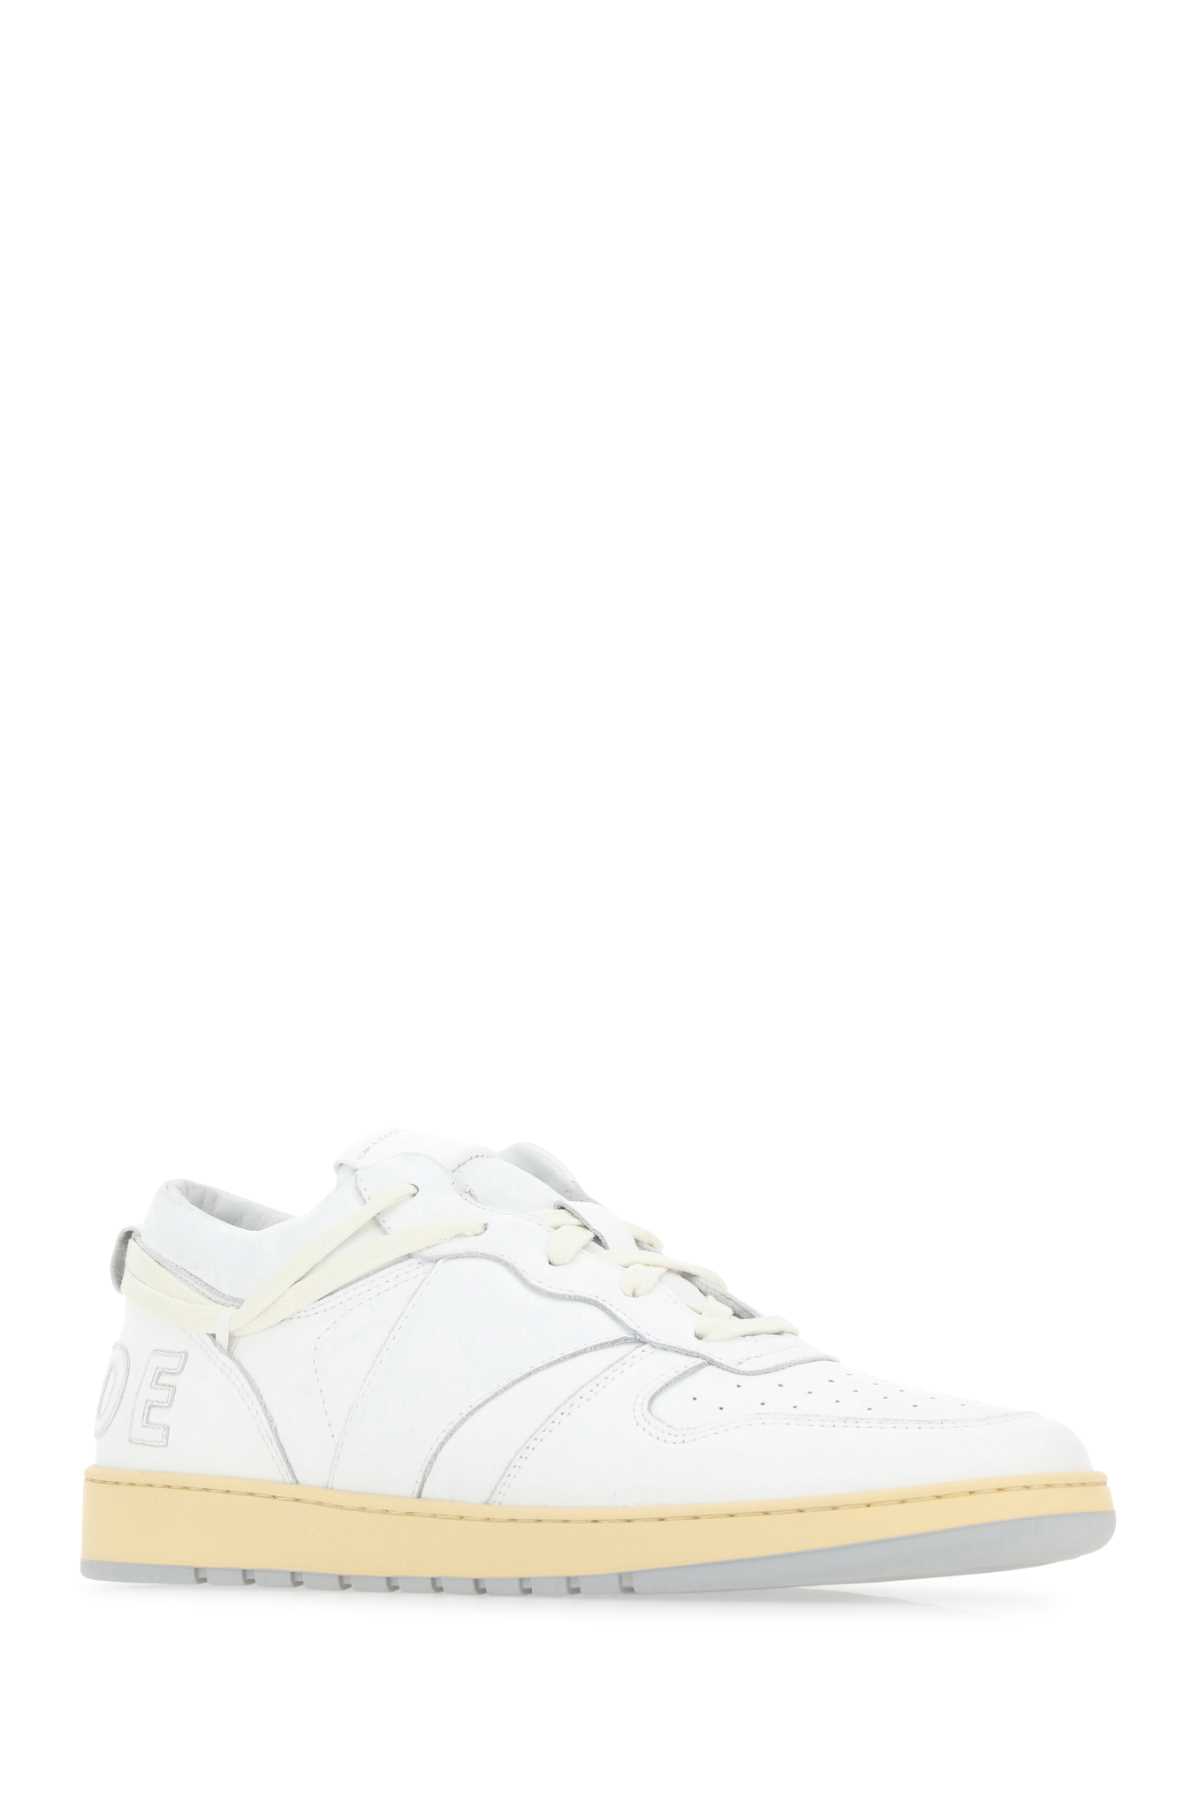 Rhude White Leather Rhecess Trainers In 0444